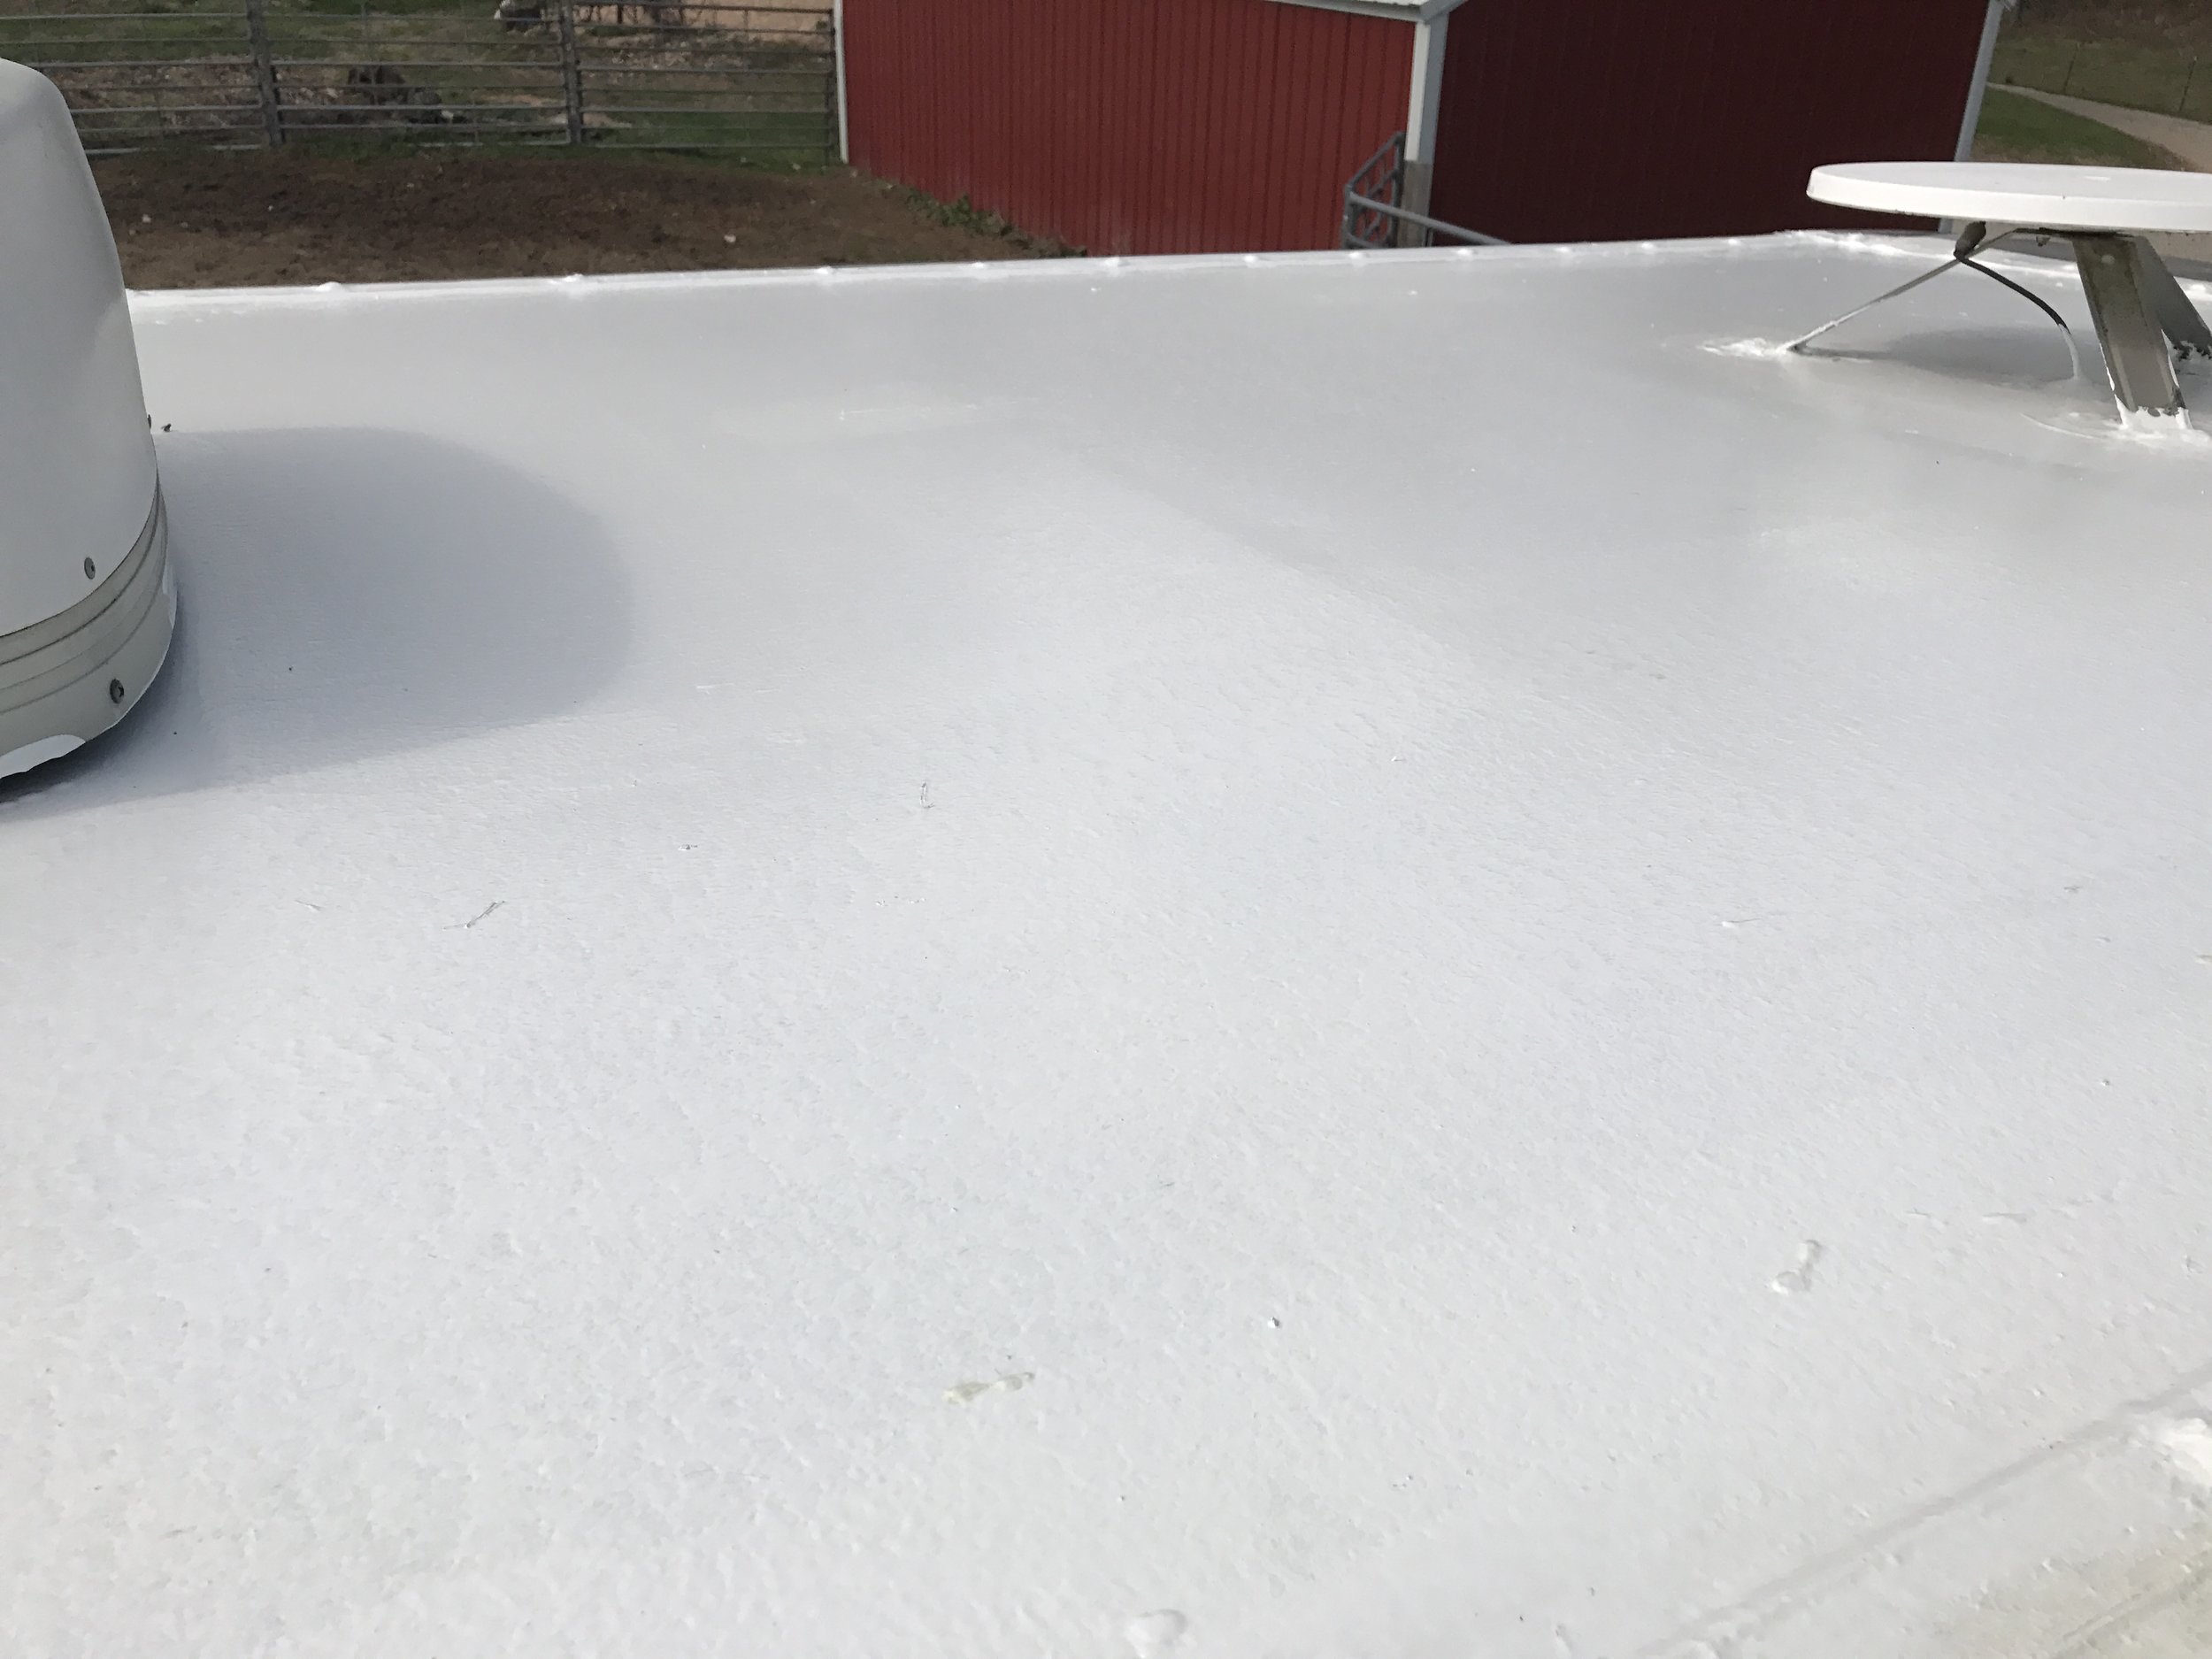 RV Rubber Roof Coating